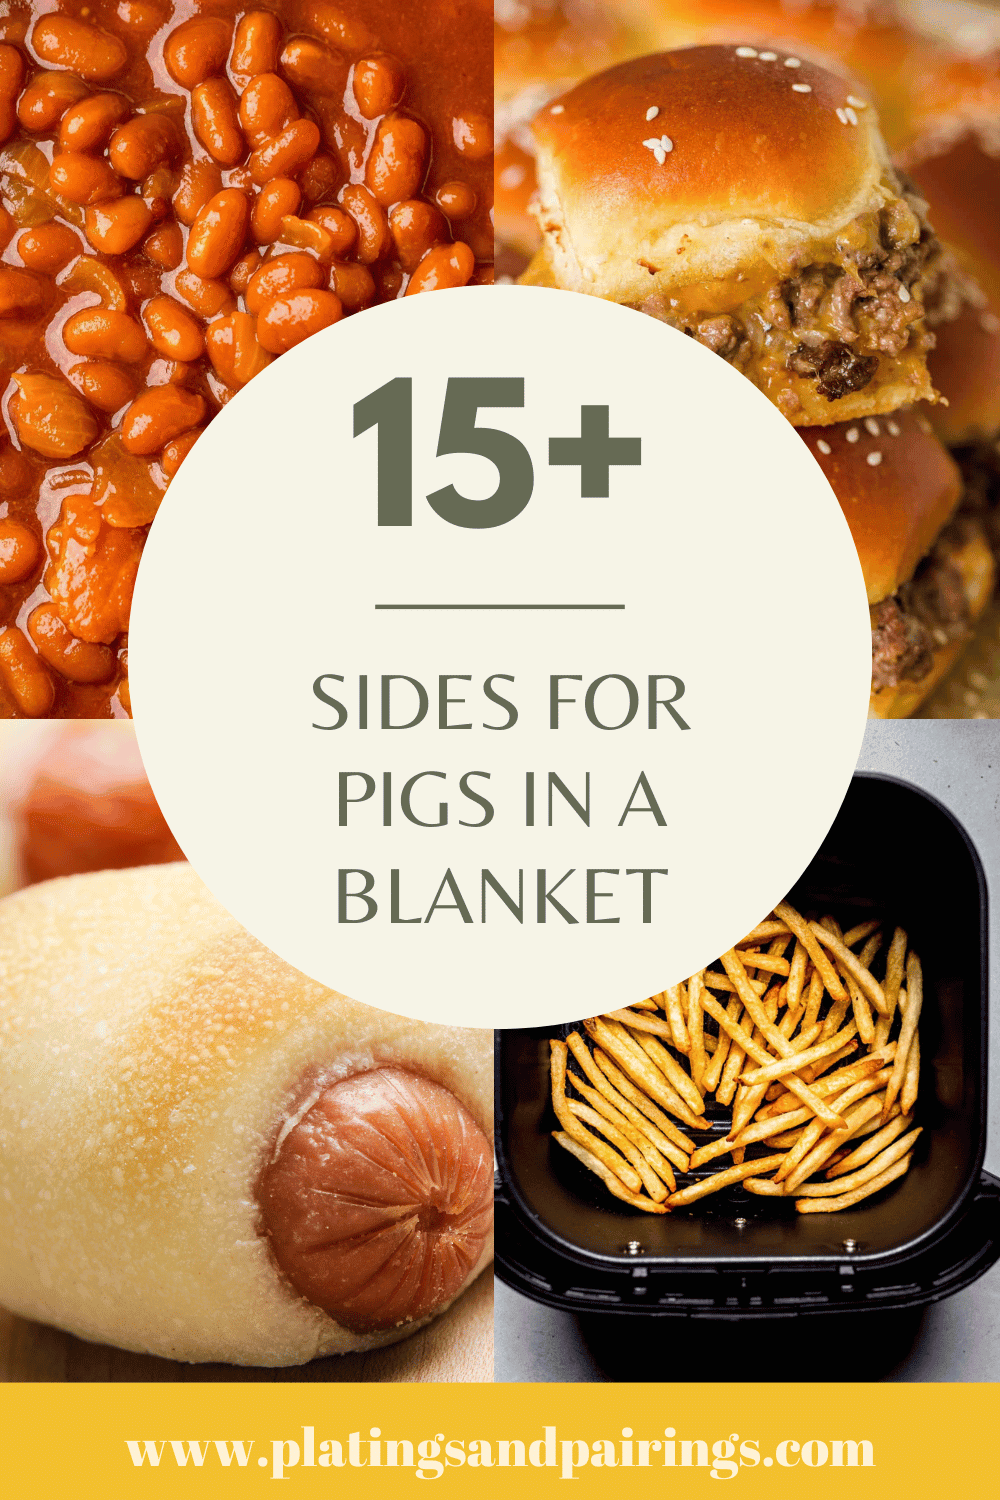 Collage of sides for pigs in a blanket with text overlay.